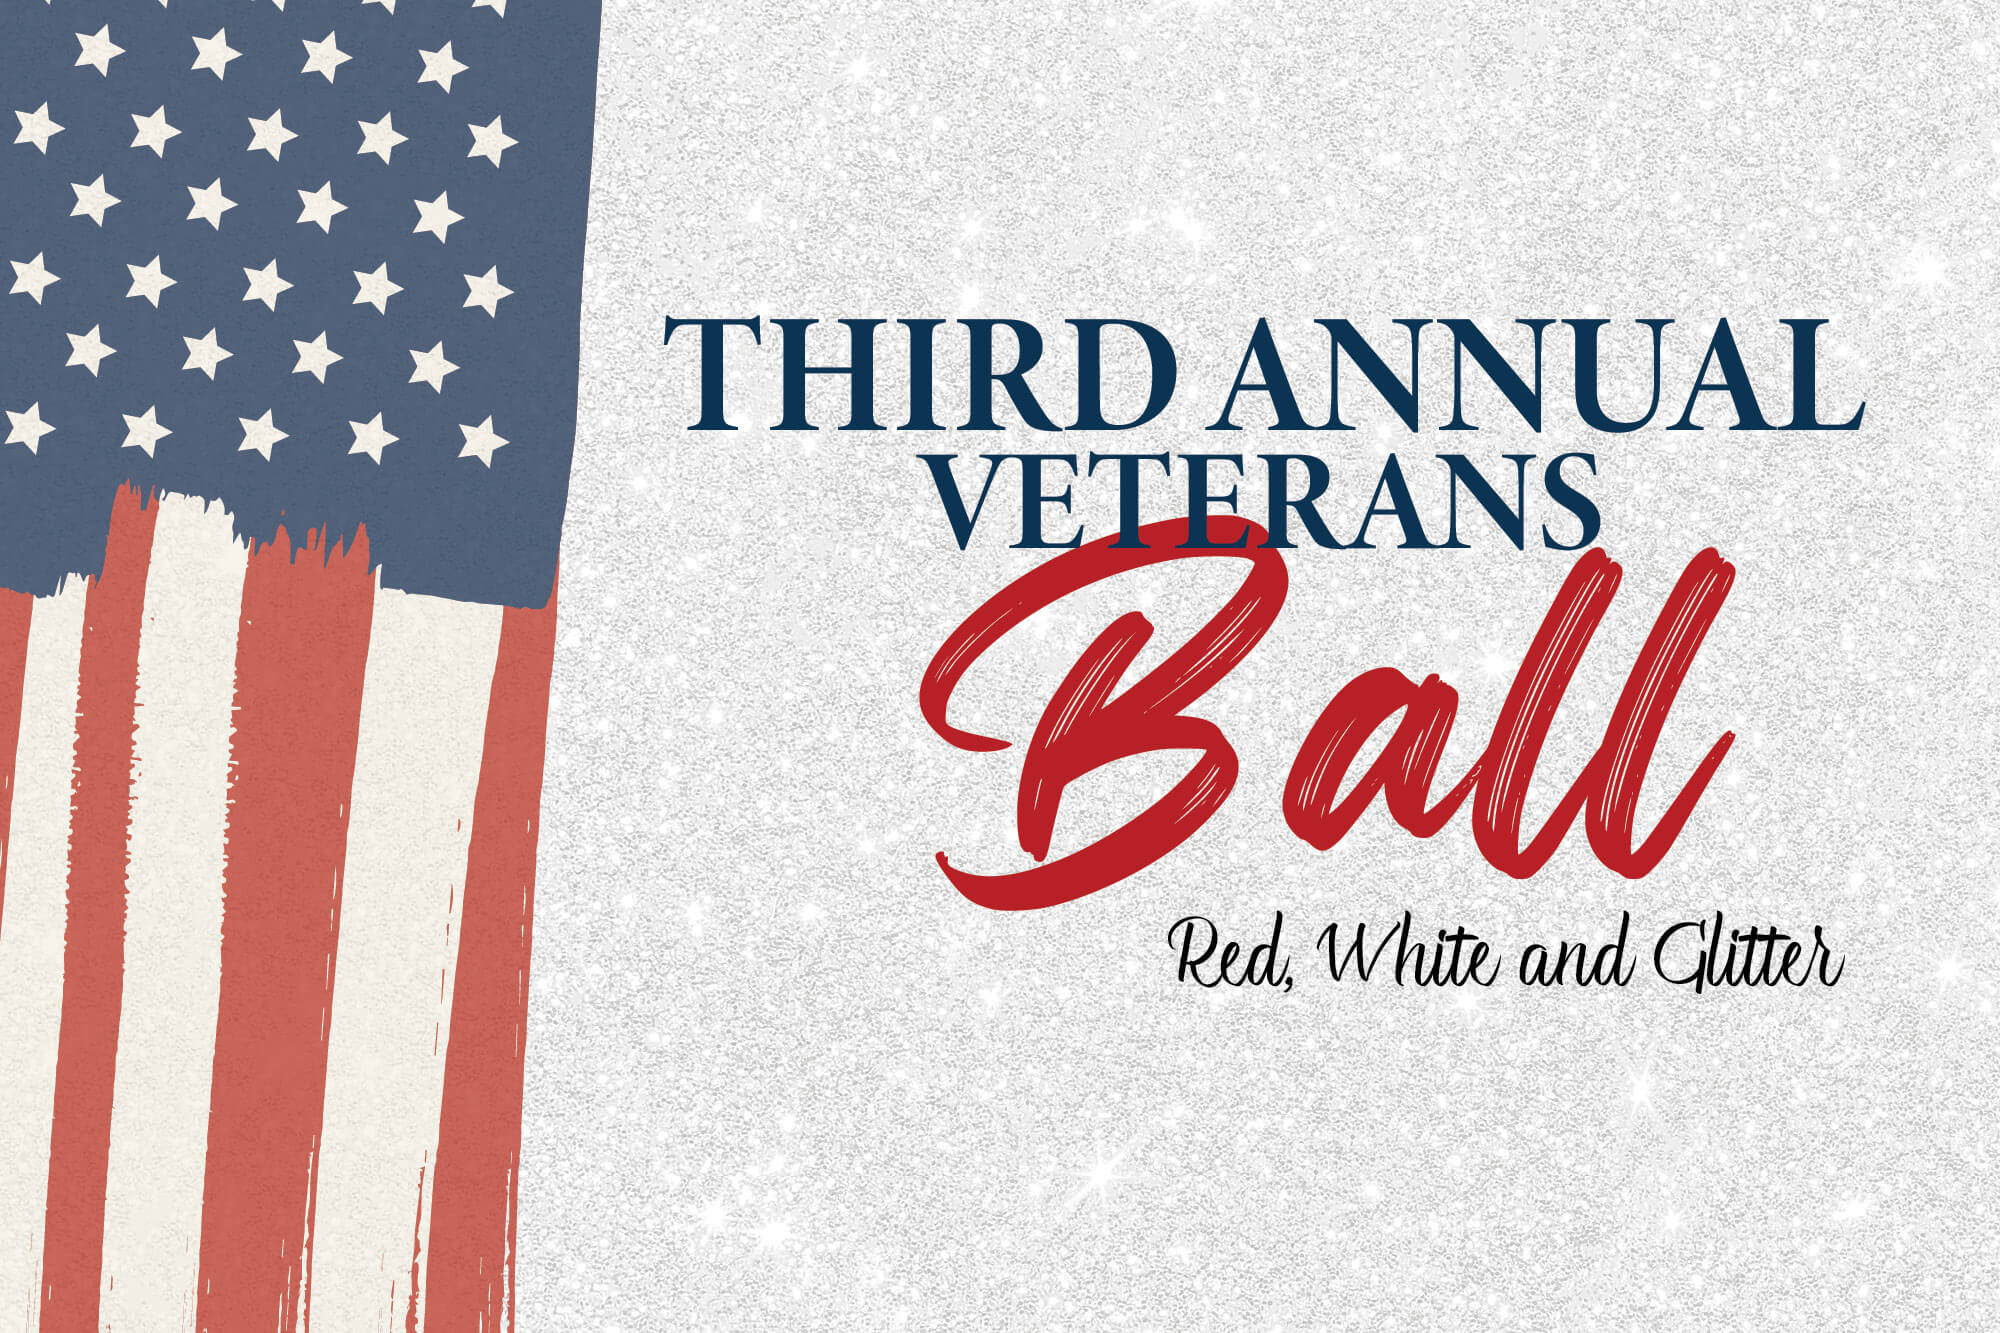 Image for Third Annual Veterans Ball press release.